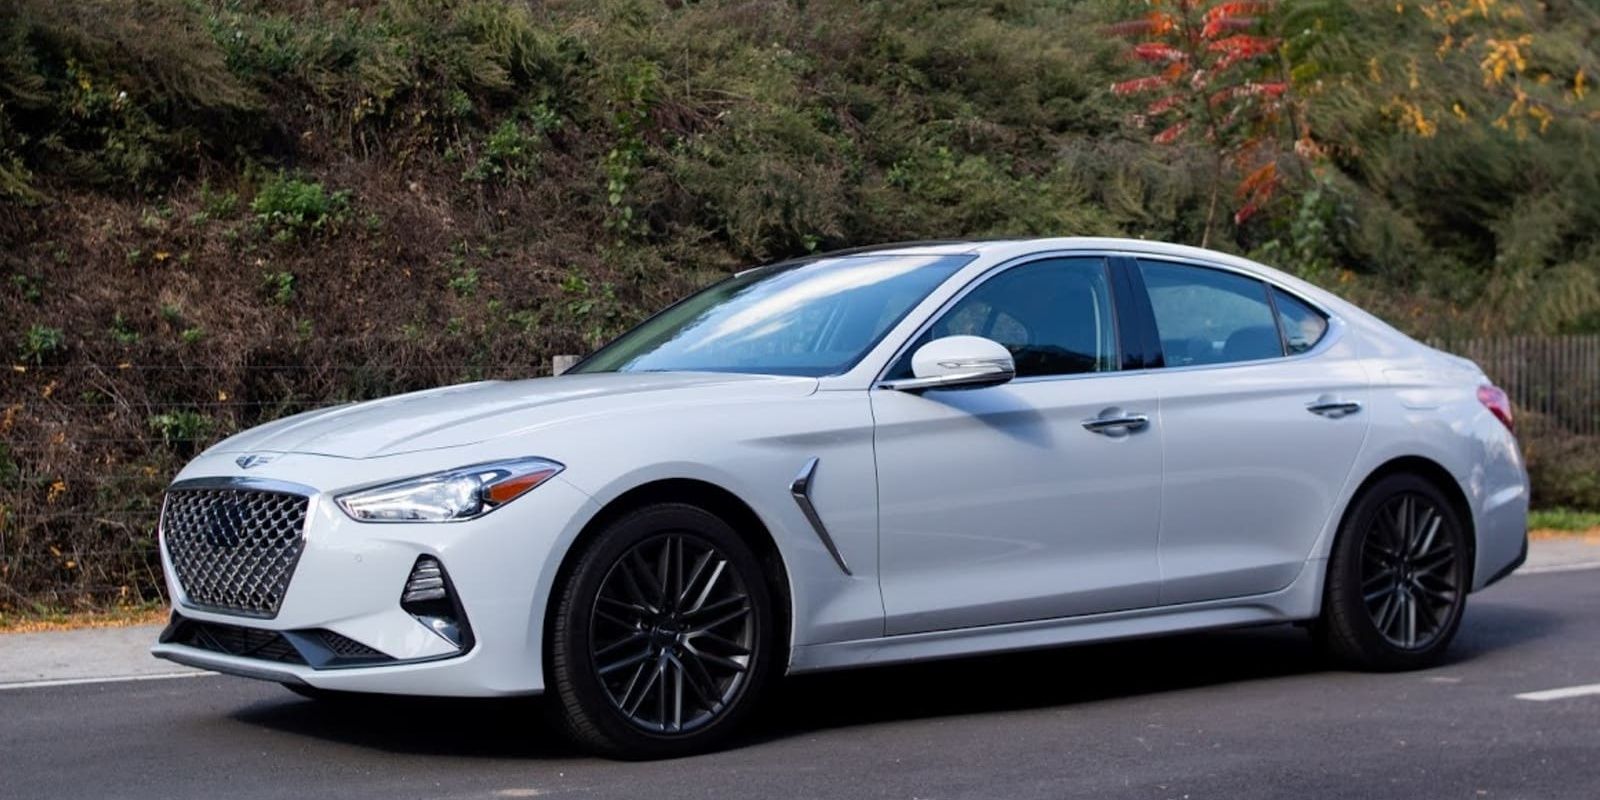 10 Best Entry-Level Luxury Cars On The Market In 2020